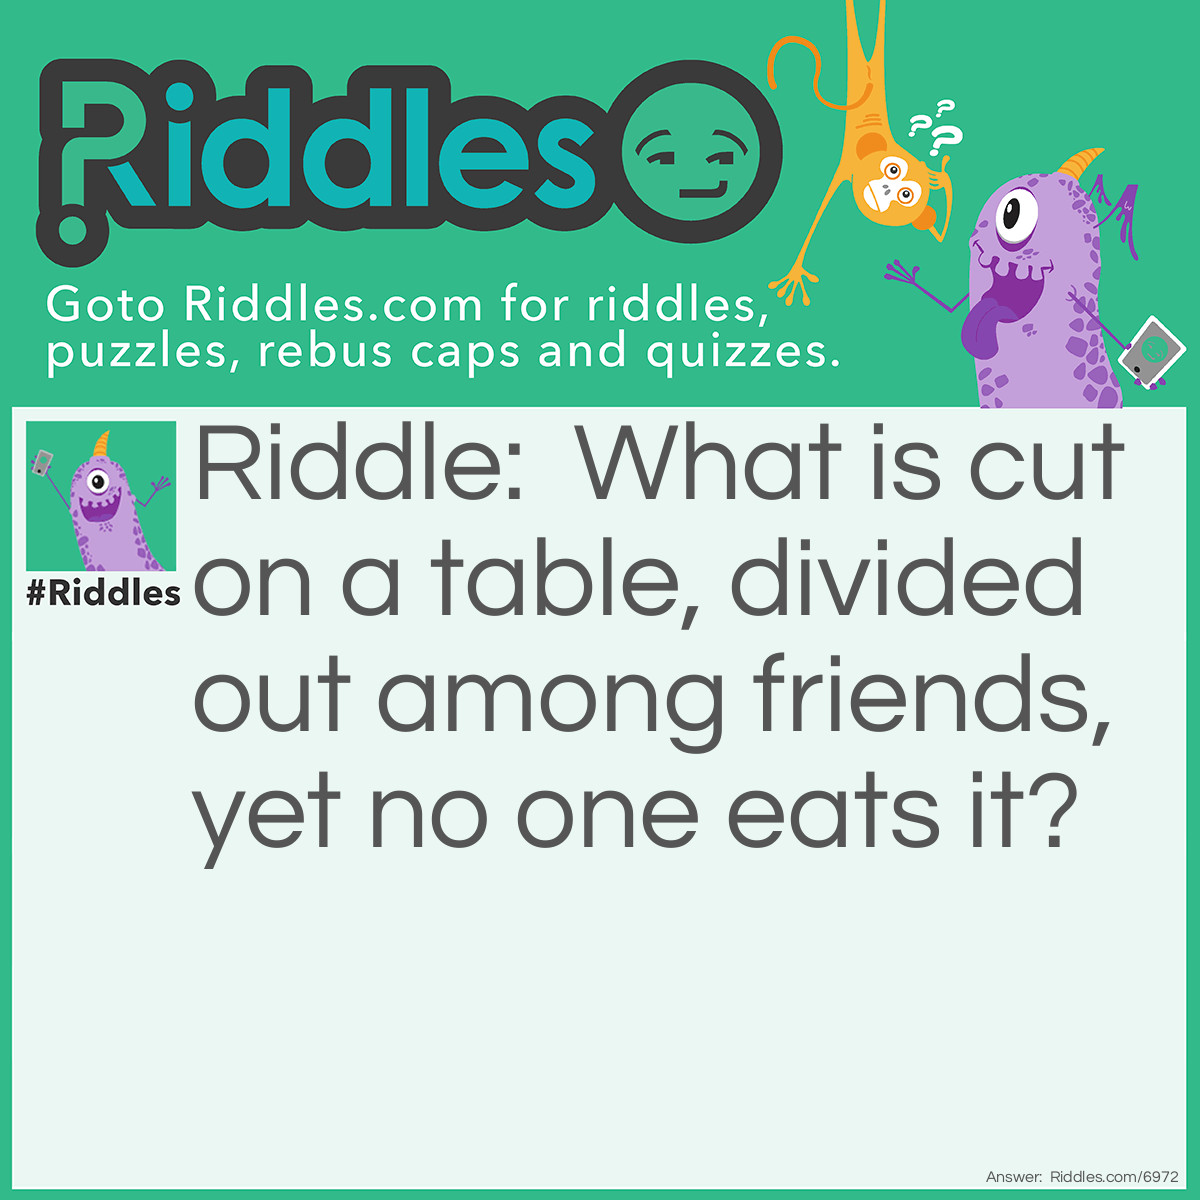 Riddle: What is cut on a table, divided out among friends, yet no one eats it? Answer: A deck of cards on a poker table.